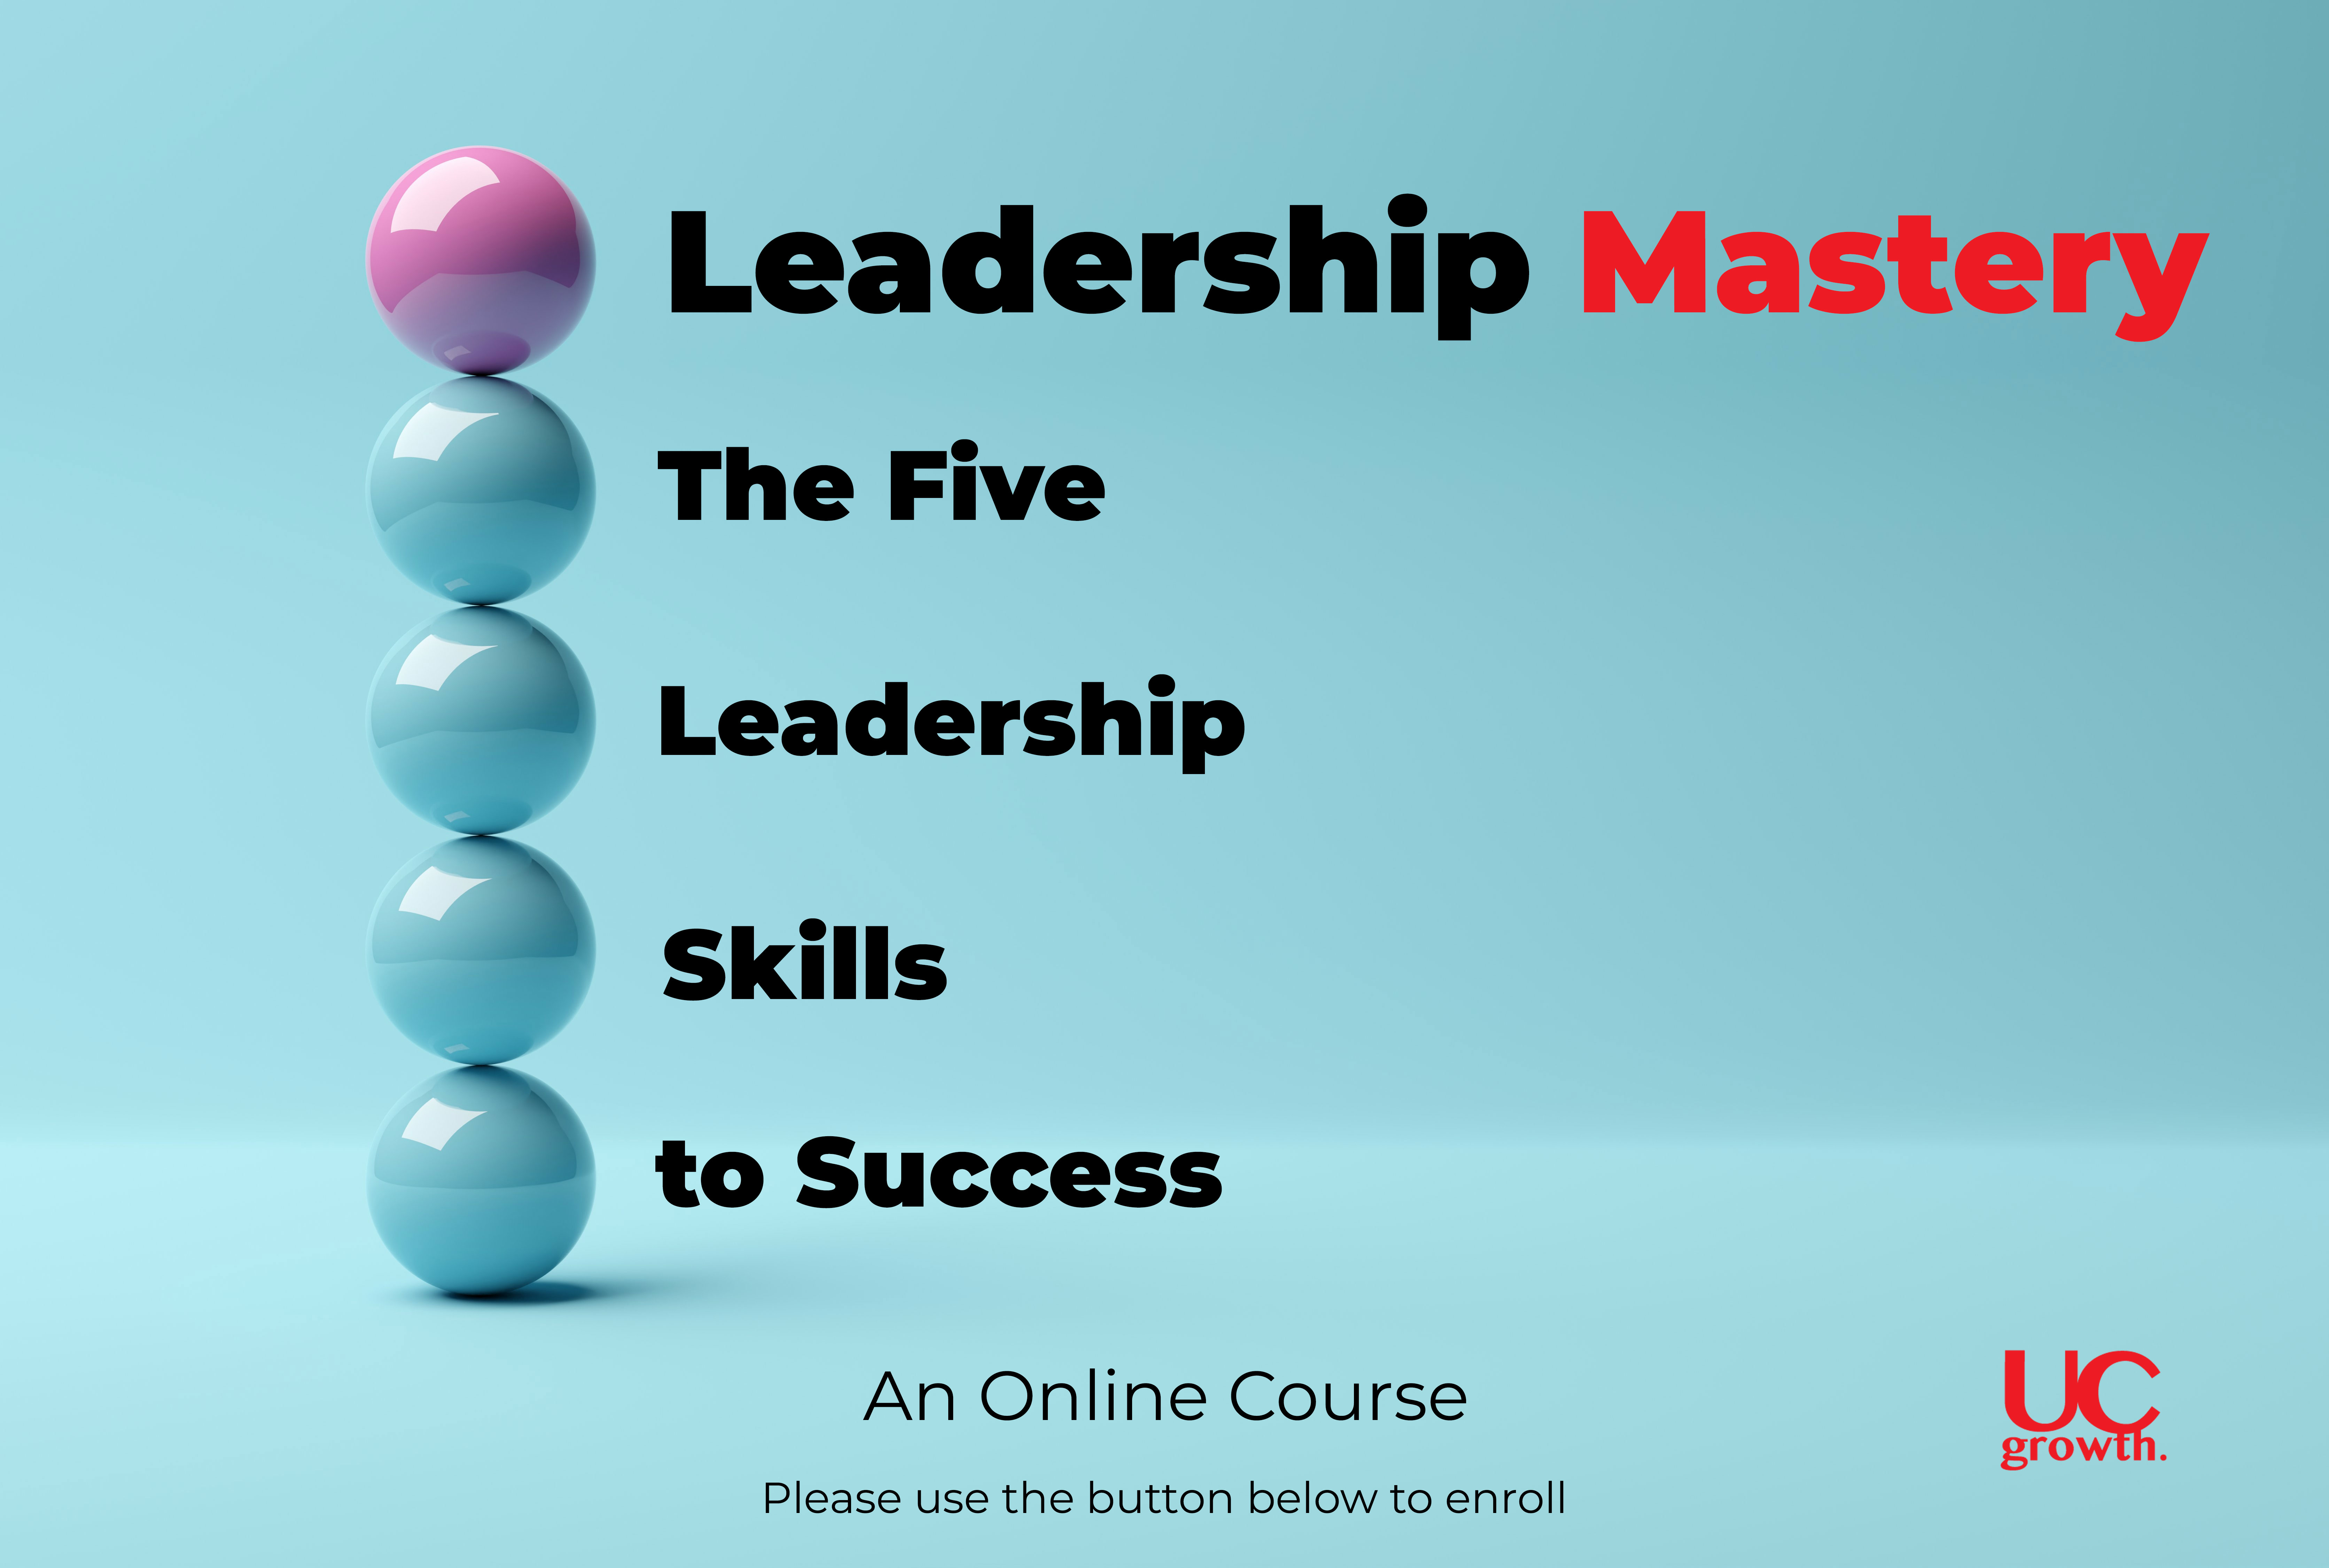 Leadership Mastery - An Online Course